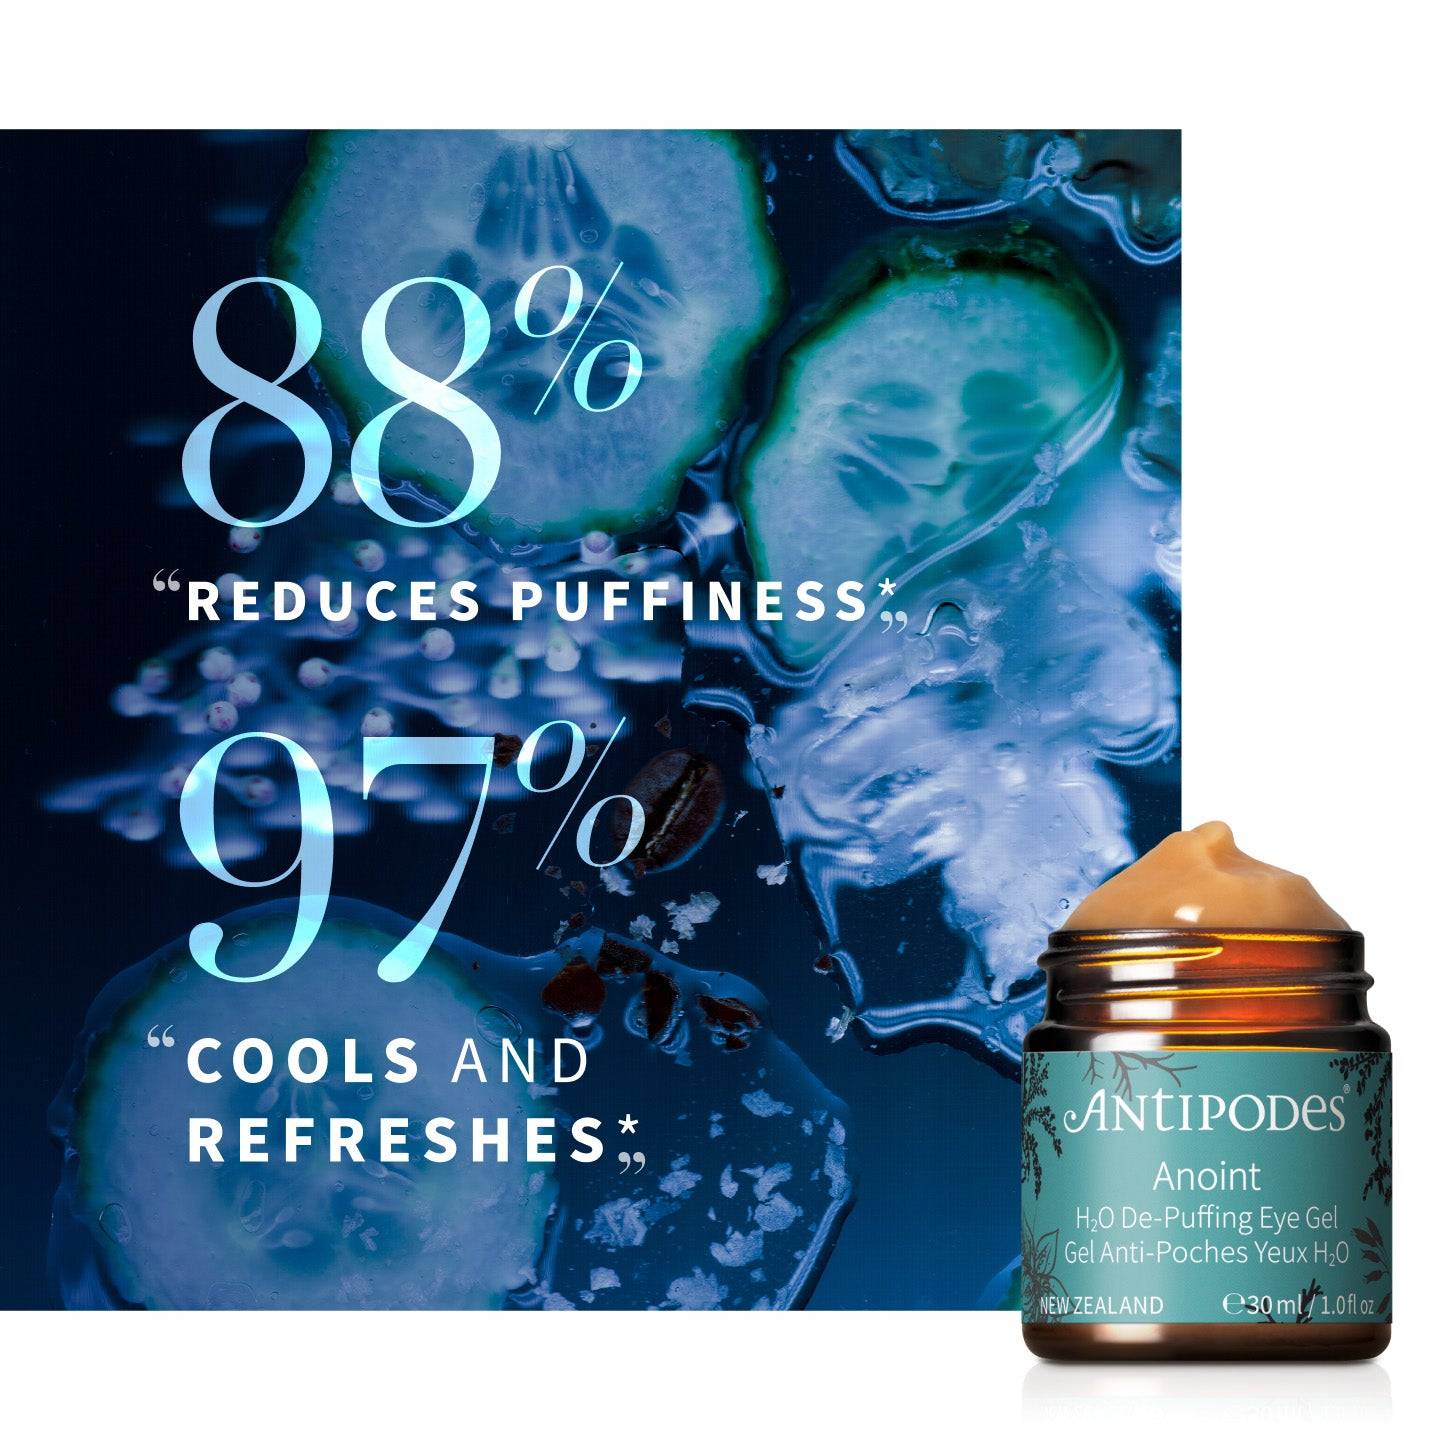 88% “reduces puffiness”* 97% “cools and refreshes”* .